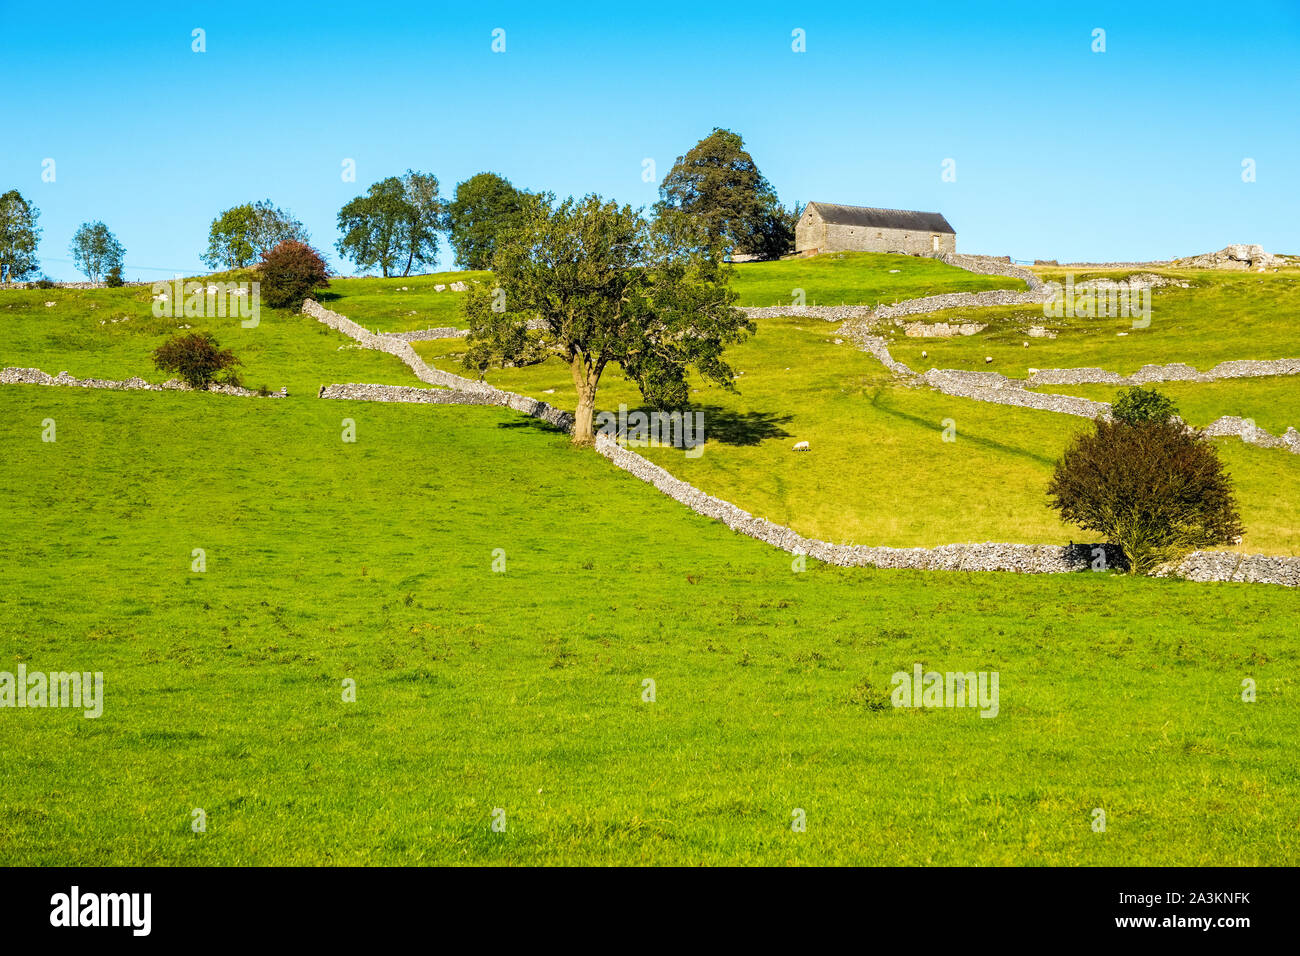 Typical White Peak landscape of fields and dry stone walls, Peak District National Park, Derbyshire,UK Stock Photo